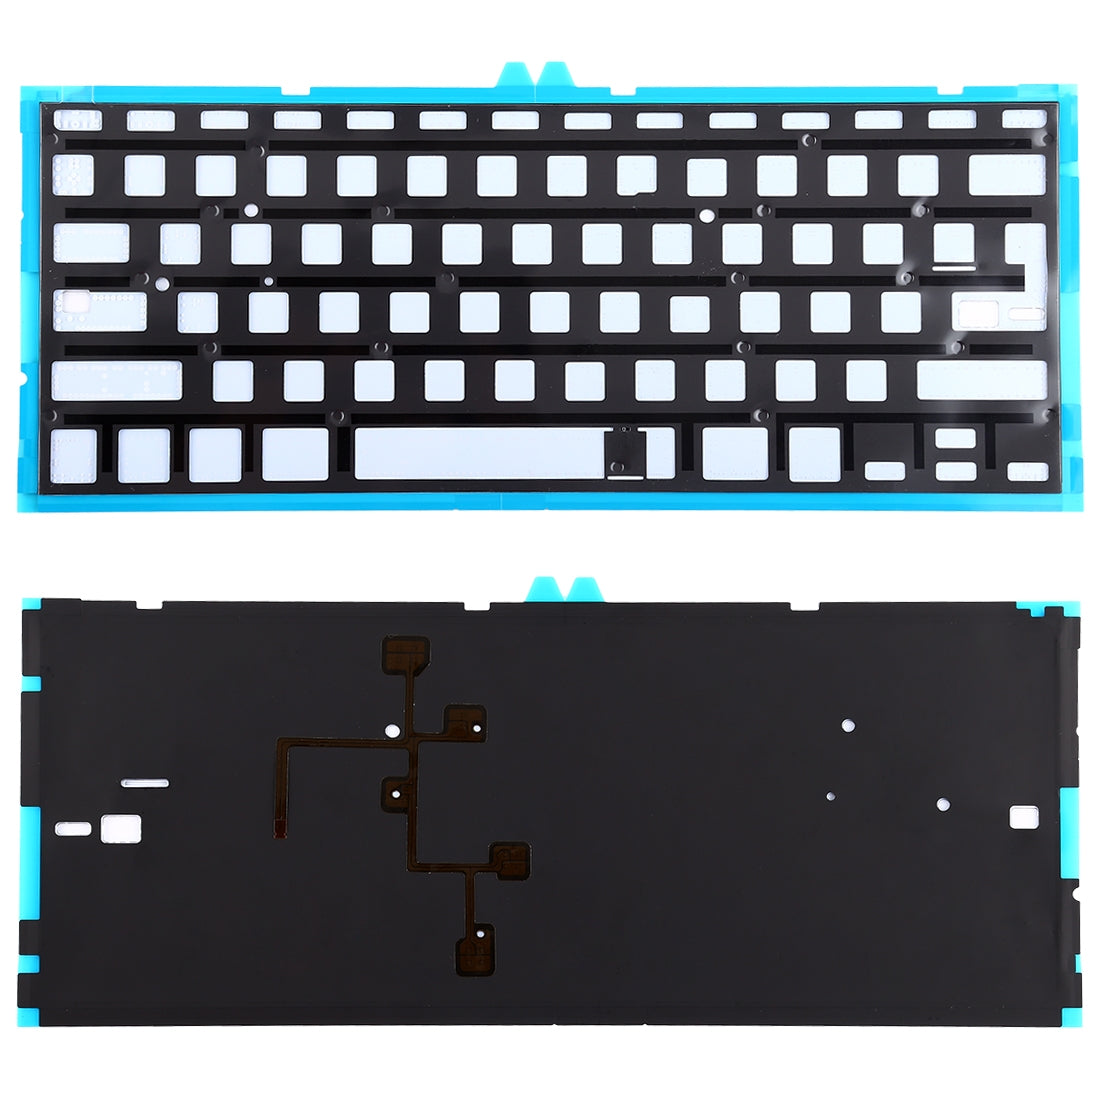 Backlight Keyboard UK Version without ñ MacBook Air 13.3 A1369 2011 2015